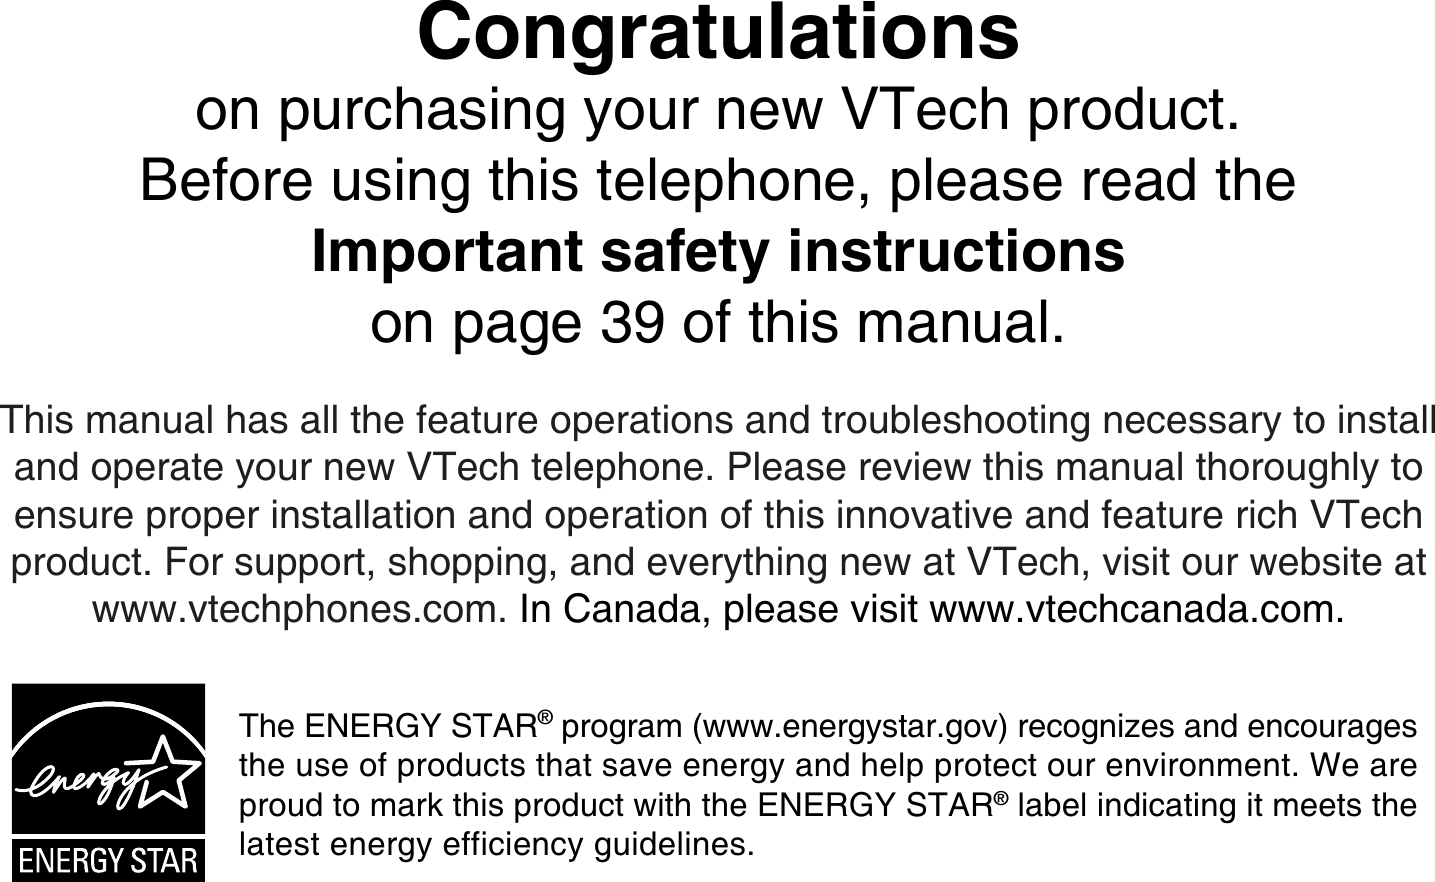 Congratulationson purchasing your new VTech product.Before using this telephone, please read the Important safety instructionson page 39 of this manual.This manual has all the feature operations and troubleshooting necessary to install and operate your new VTech telephone. Please review this manual thoroughly to ensure proper installation and operation of this innovative and feature rich VTech product. For support, shopping, and everything new at VTech, visit our website at www.vtechphones.com. In Canada, please visit www.vtechcanada.com.The E N E RG Y  S TA R® program (www.energystar.gov) recogniz es and encourages the use of products that save energy and help protect our environment. W e are proud to mark  this product with the E N E RG Y  S TA R® label indicating it meets the latest energy efficiency guidelines.